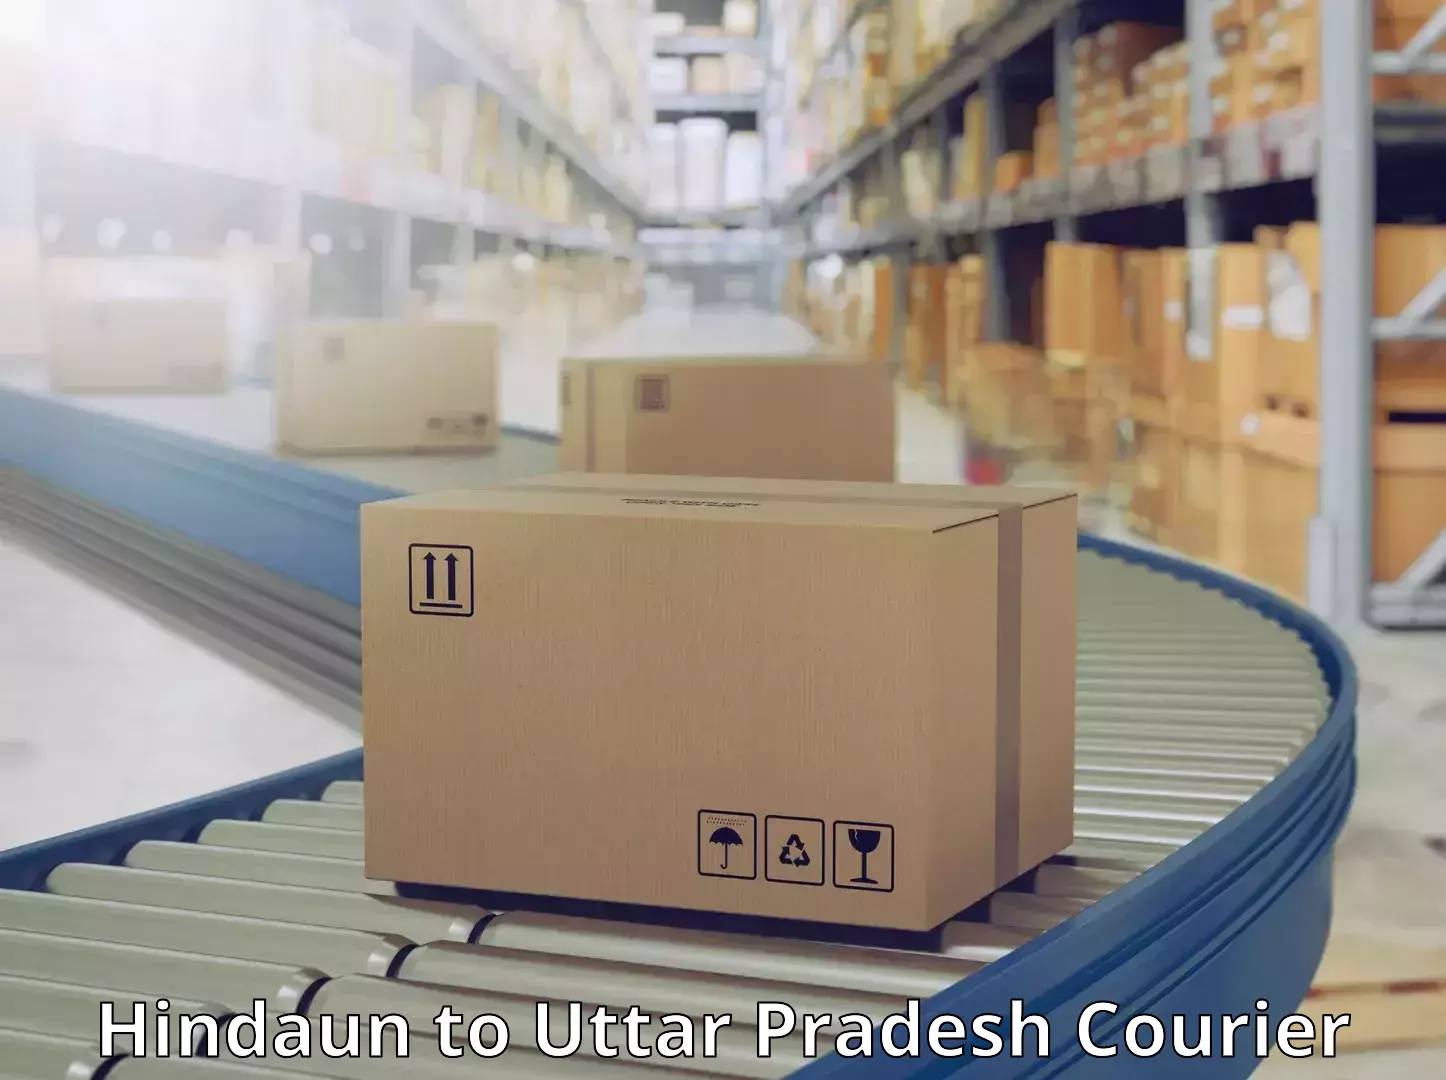 Courier services in Hindaun to Allahabad